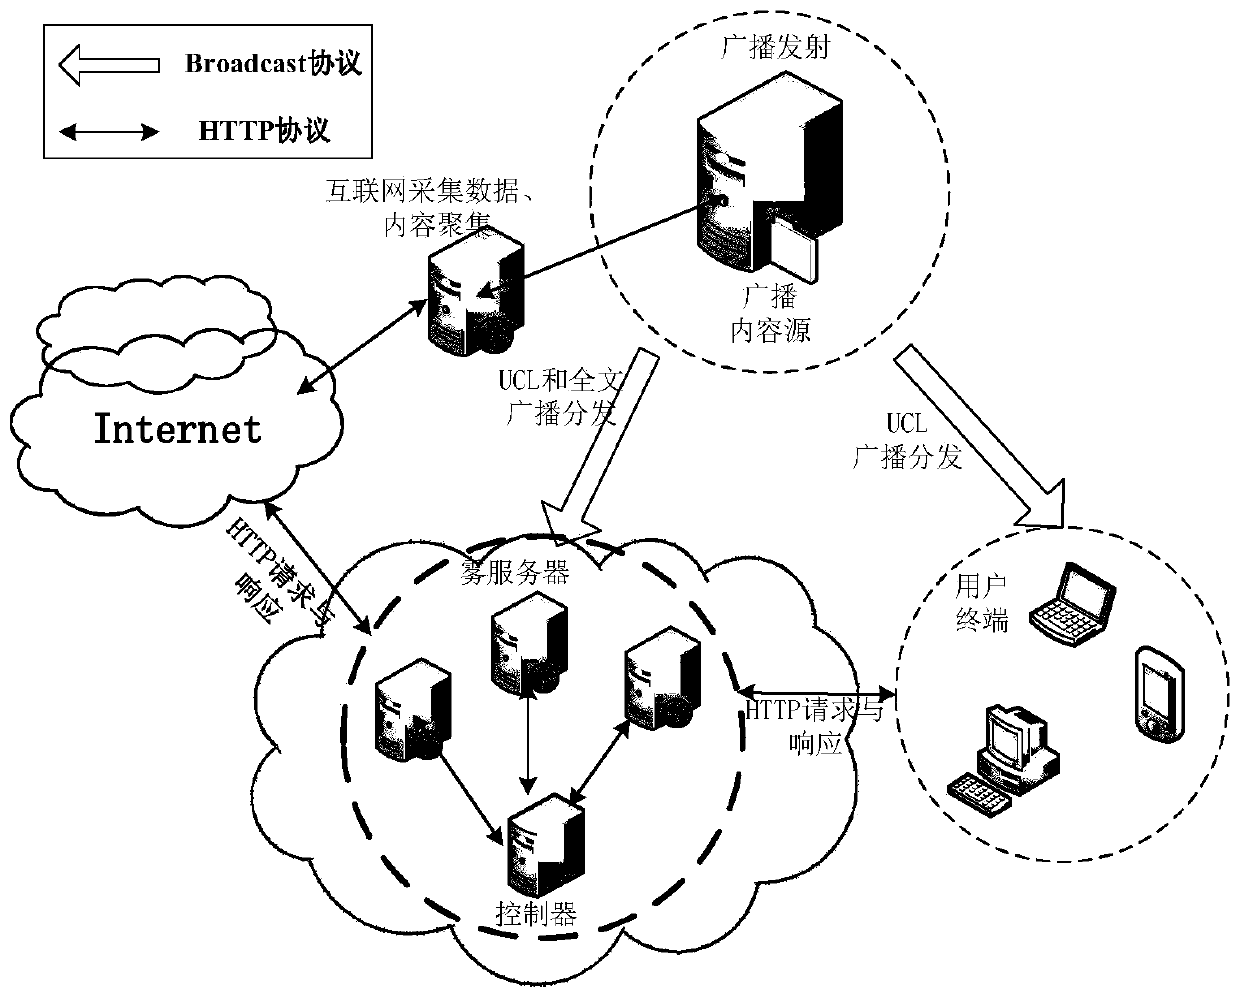 Content collaborative distribution method and application system of fog computing architecture based on broadcast storage network